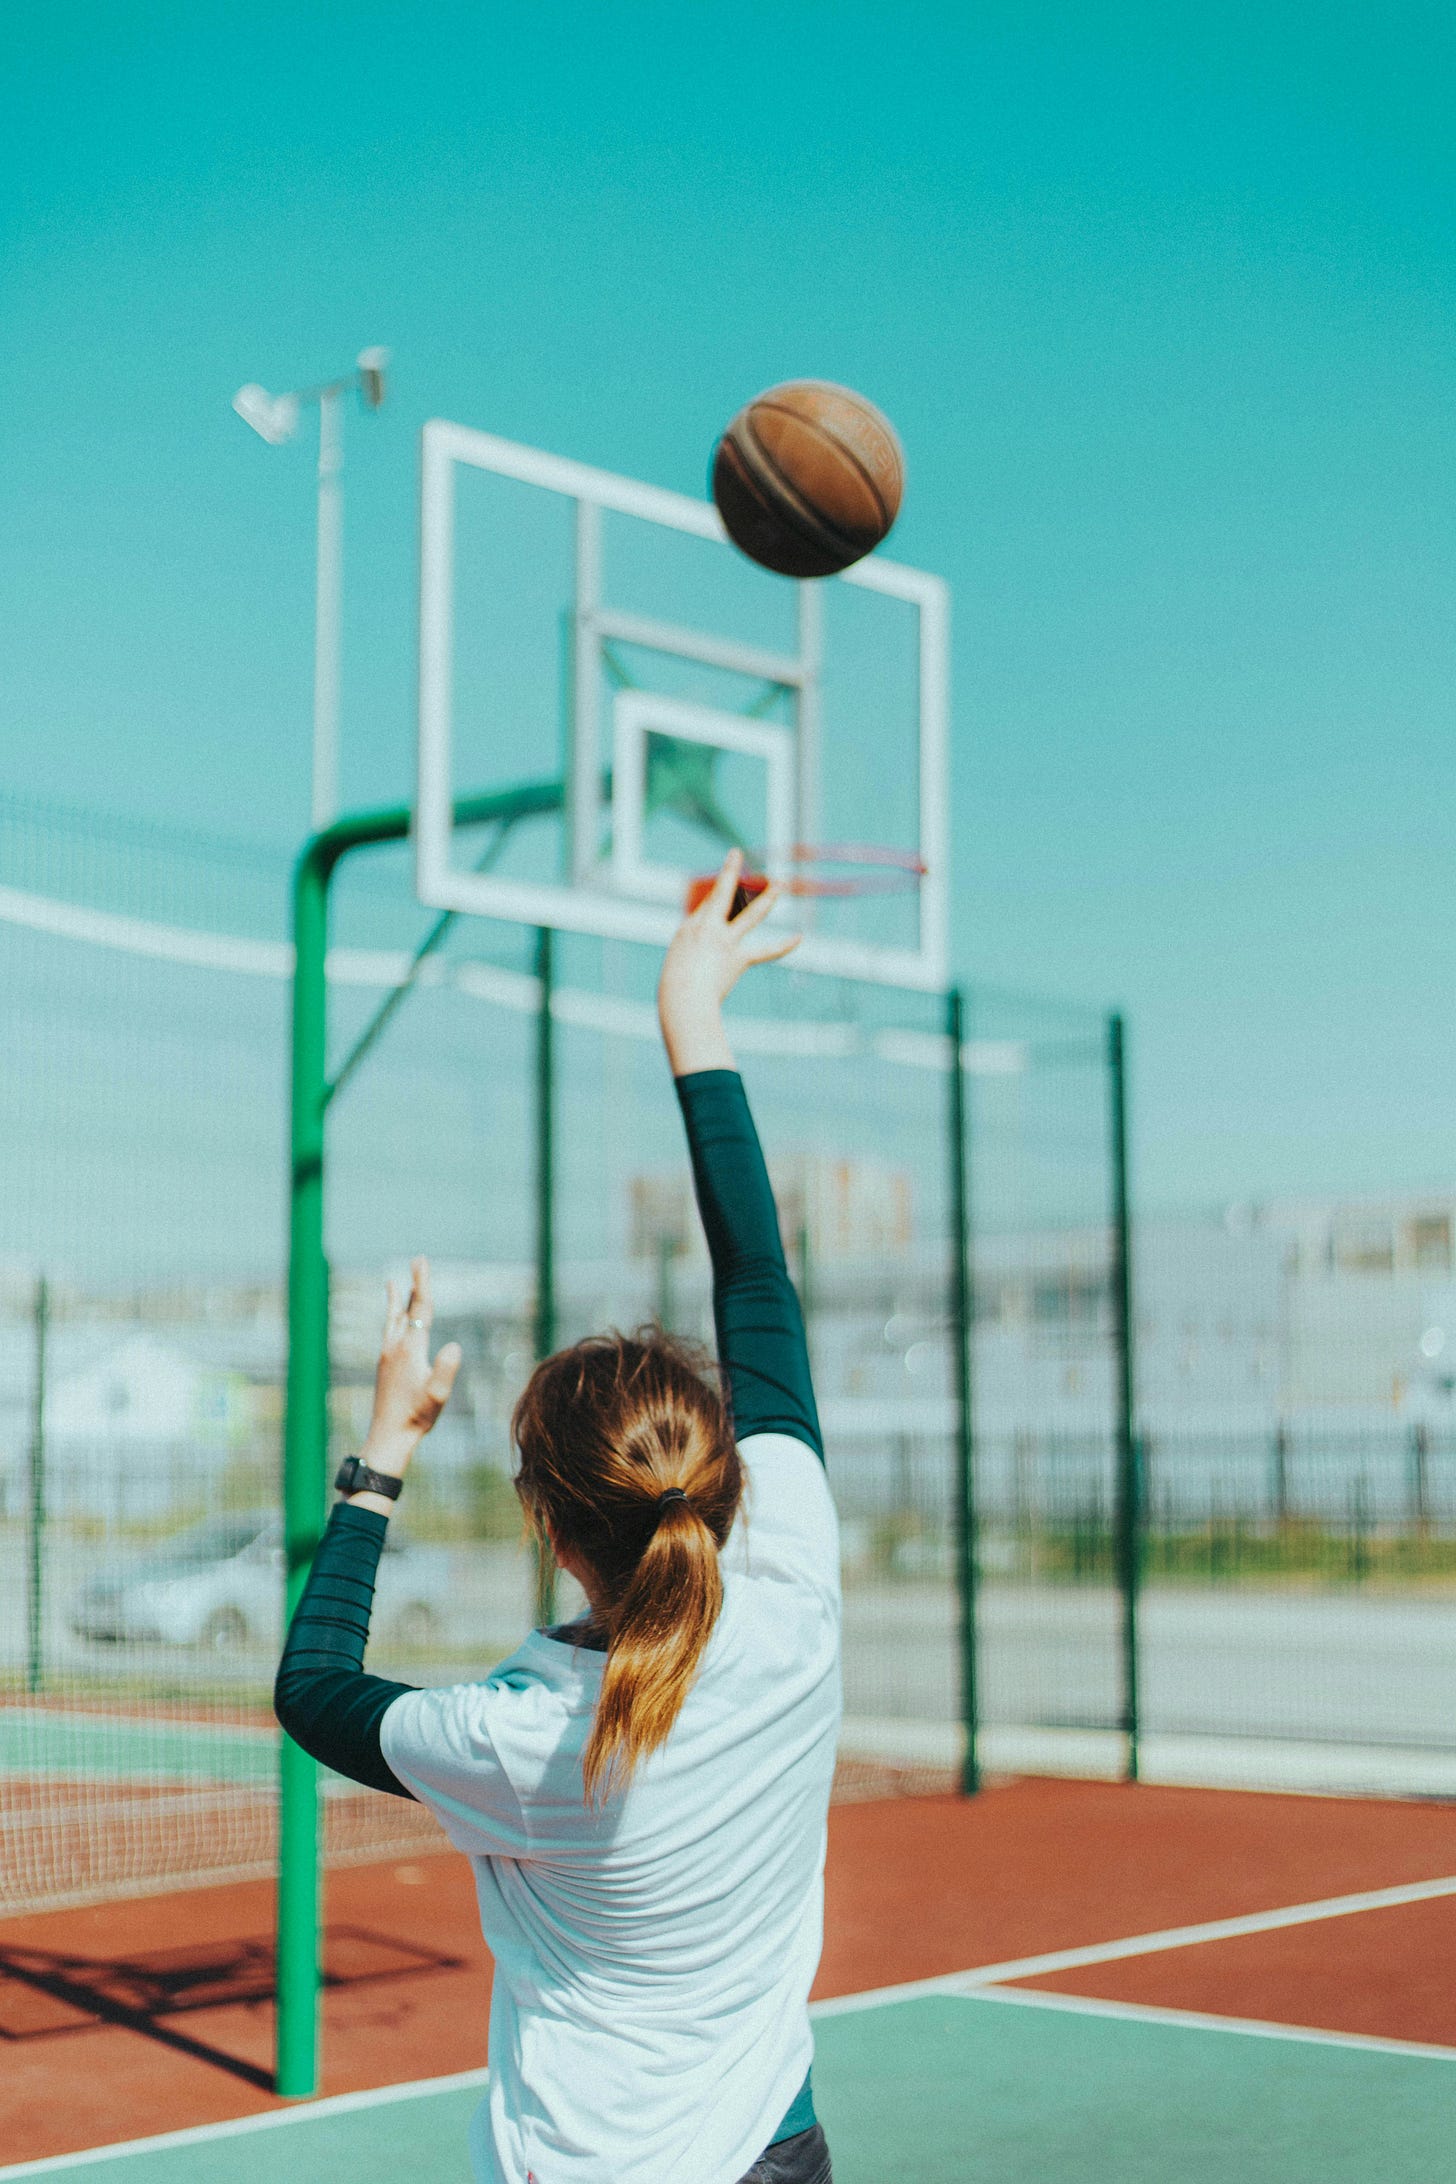 Woman with poney tail throwing a basketball at a hoop. Will she sink the shot?